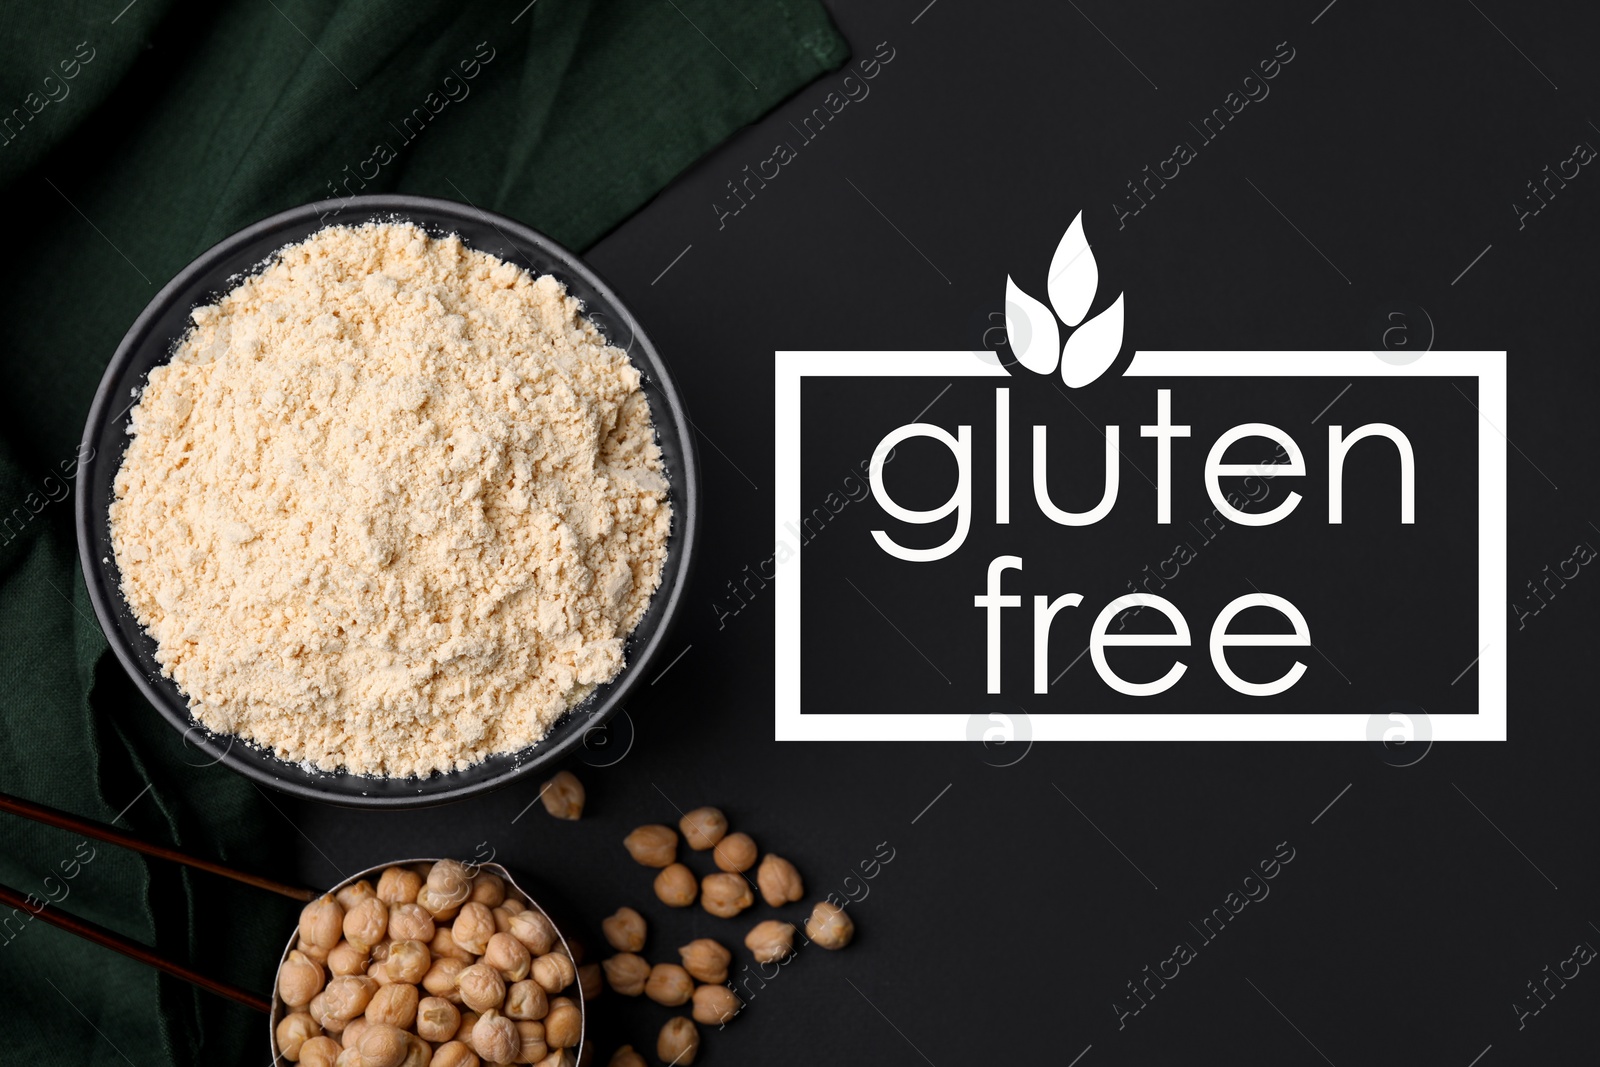 Image of Gluten free products. Chickpea flour in bowl and text on black table, top view